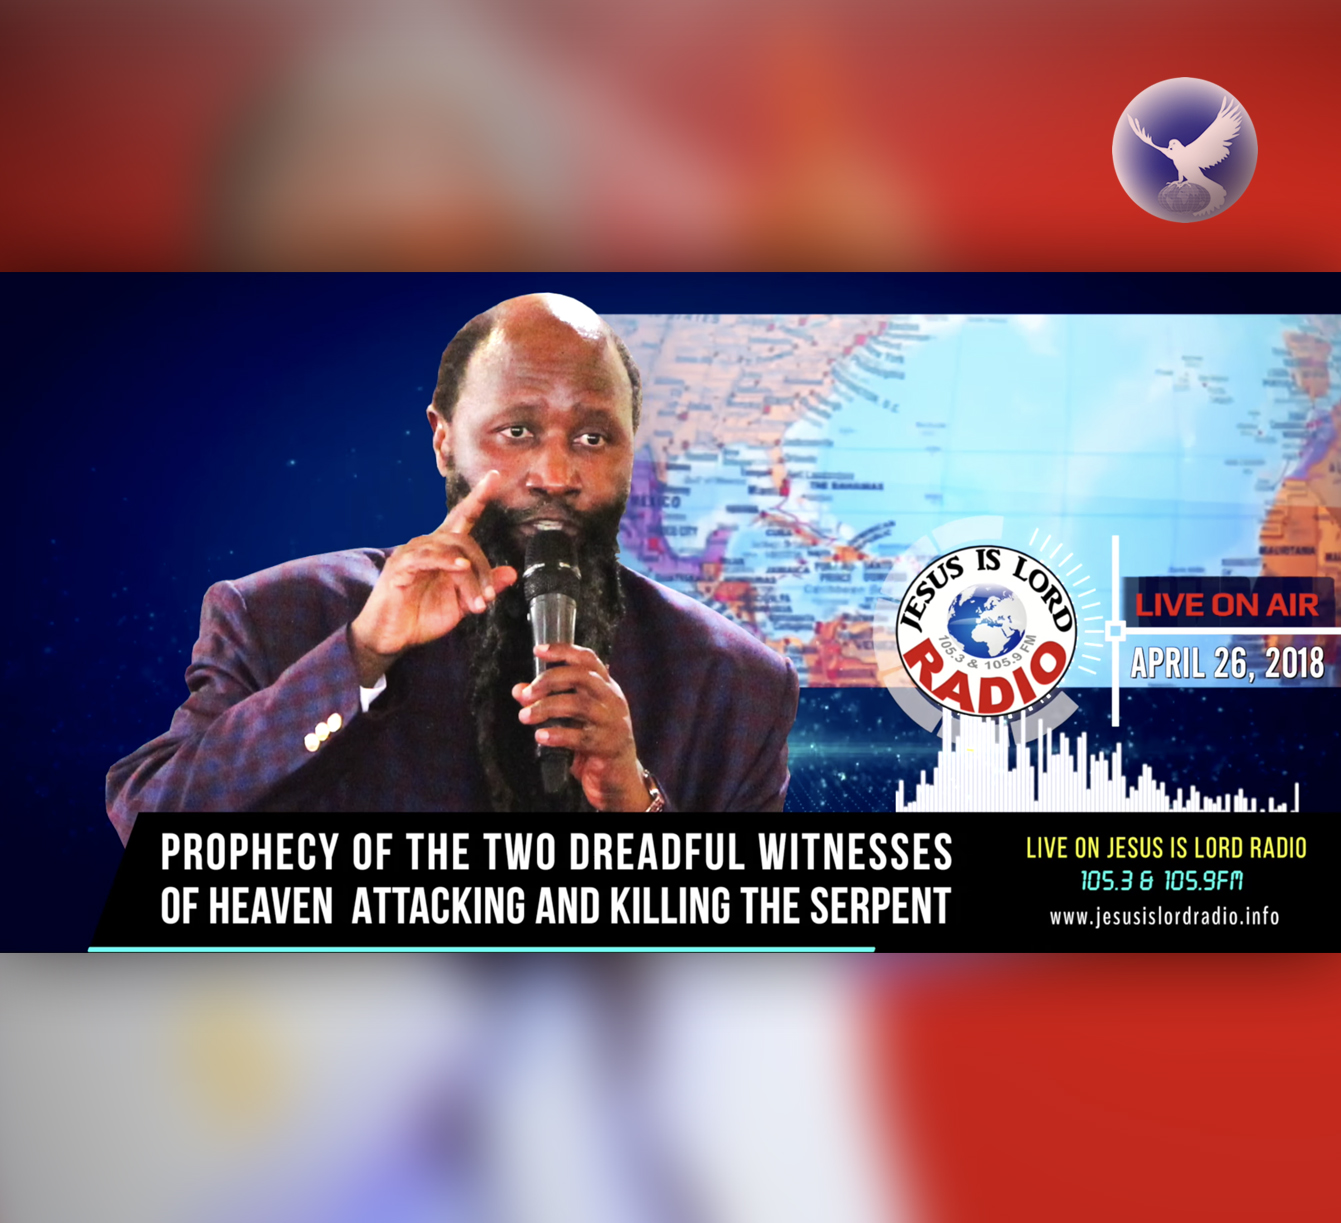 EPISODE 182 - PROPHECY OF THE TWO DREADFUL WITNESSES OF HEAVEN ATTACKING & KILLING THE SERPENT (26APR2018) - PROPHET DR. OWUOR